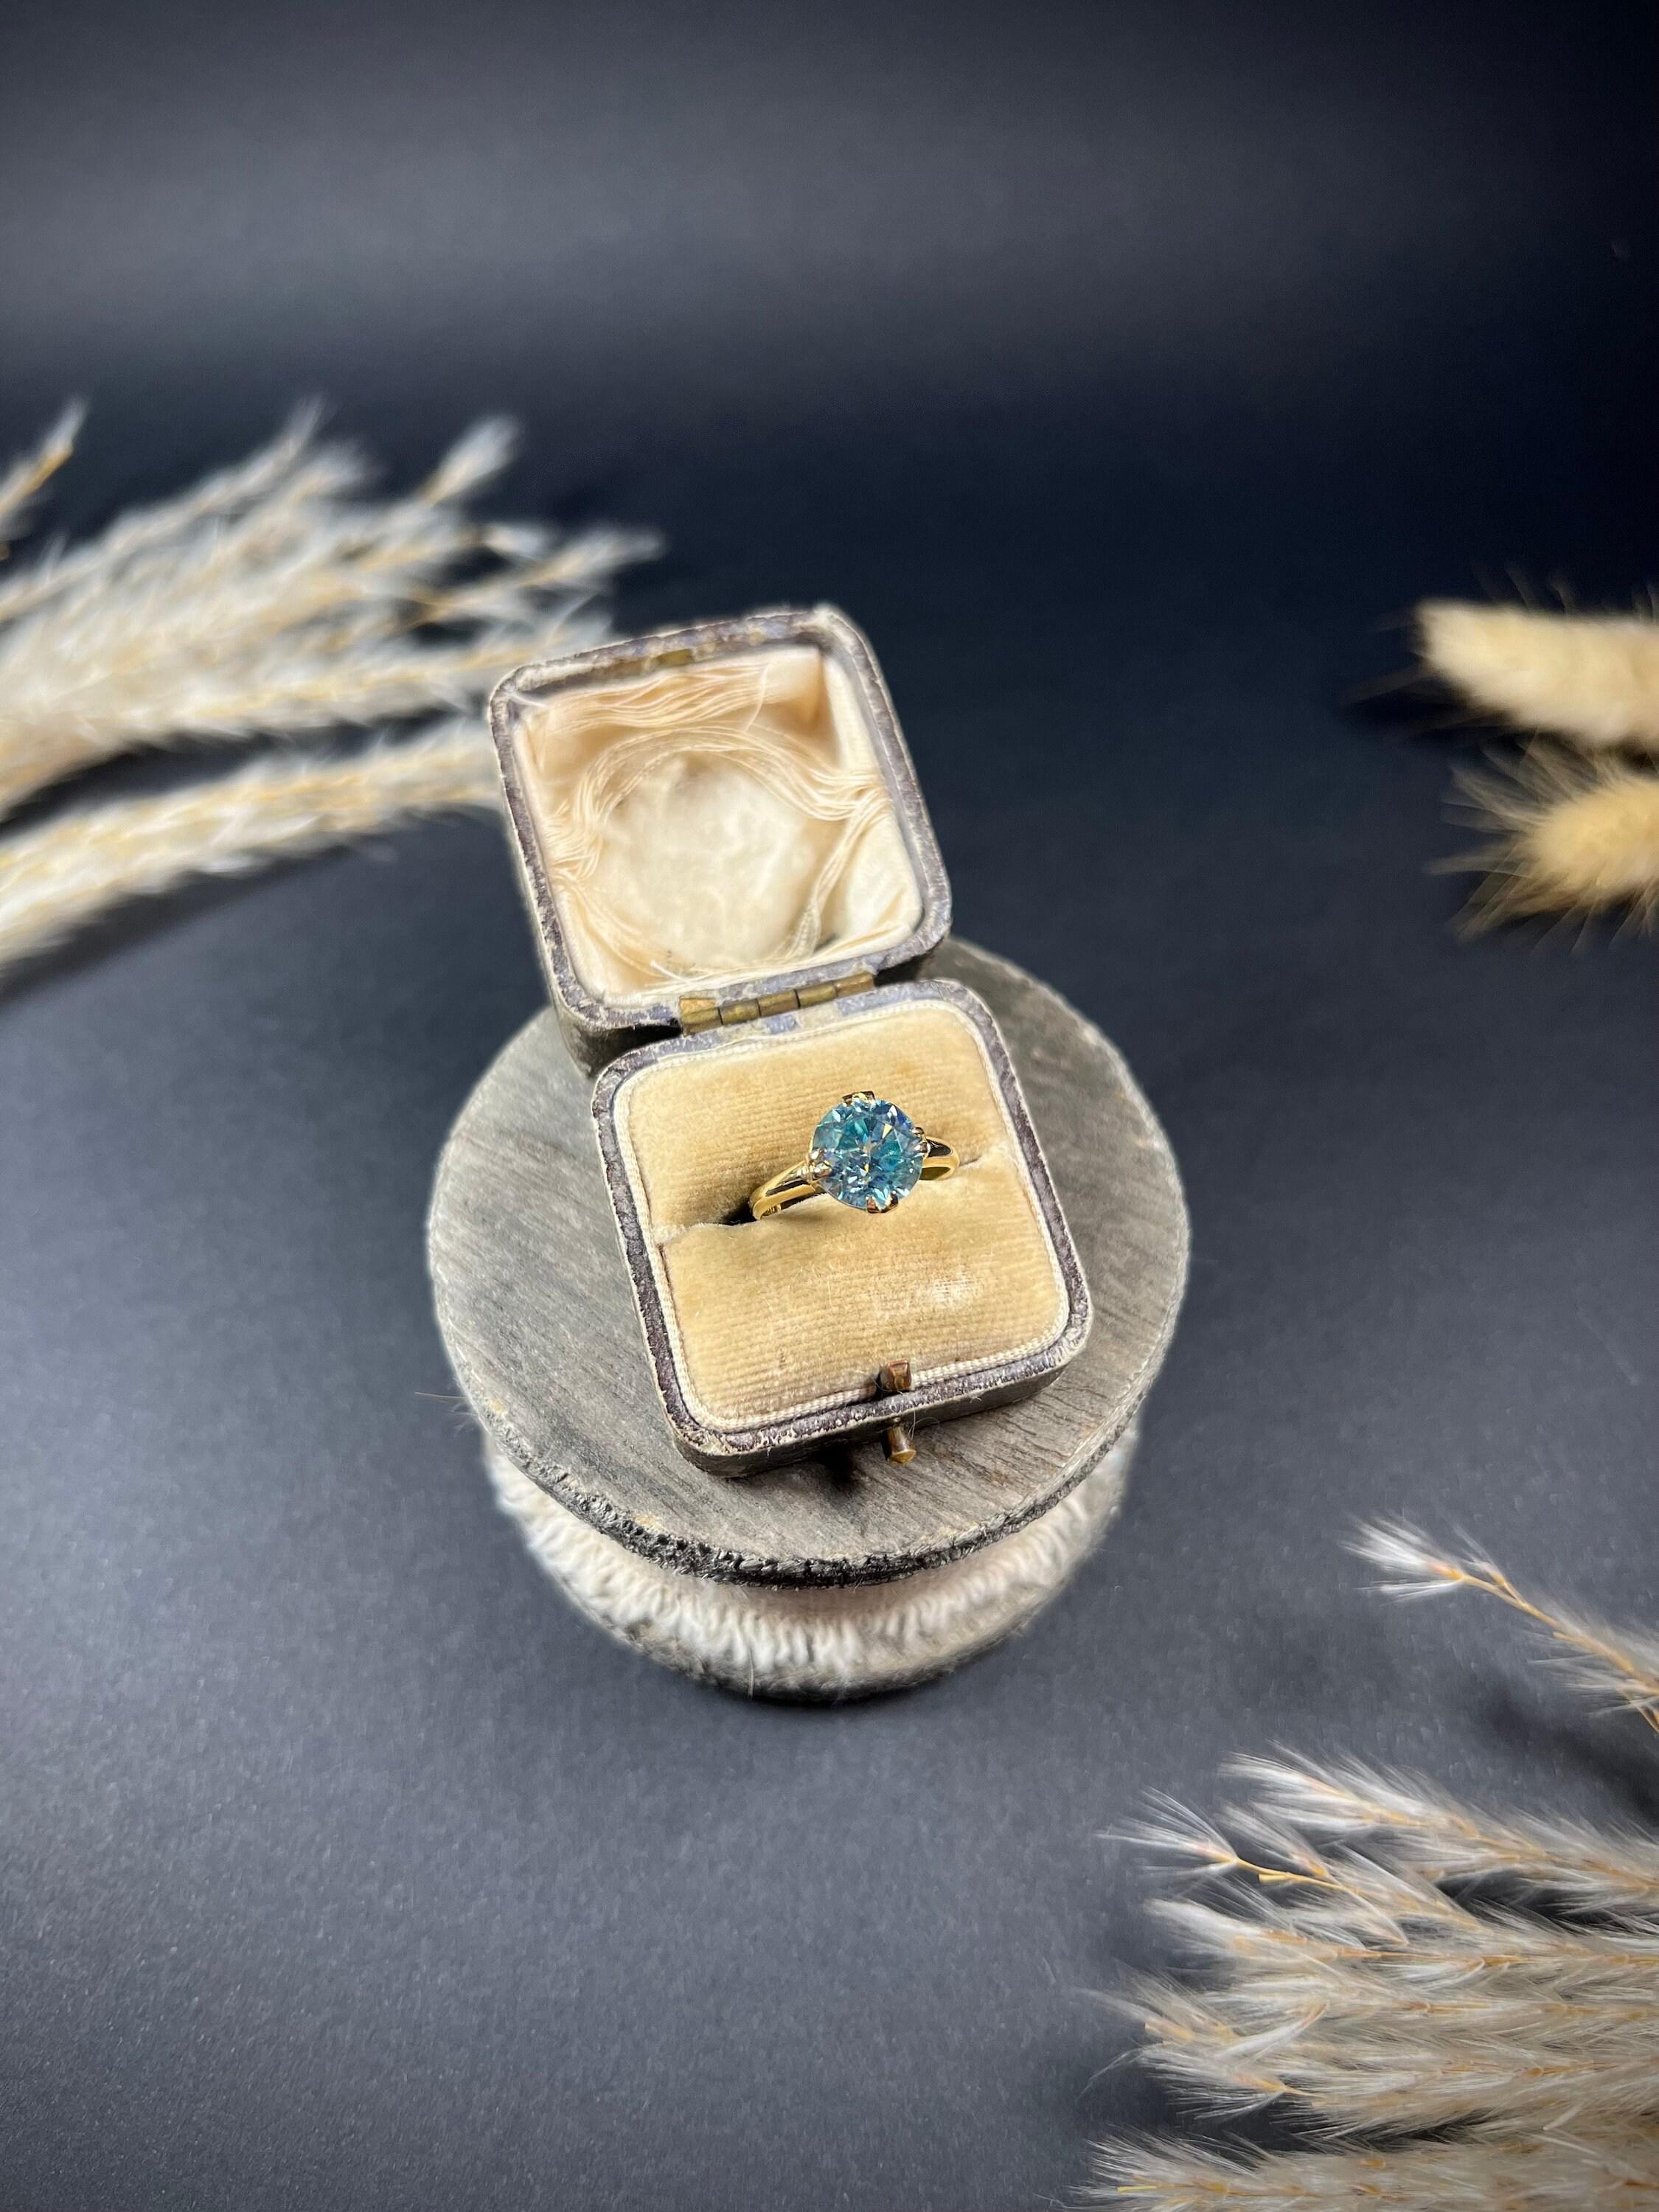 Vintage Zircon Ring 

18ct Gold Stamped

Circa 1960s

This exquisite vintage ring is the epitome of timeless elegance and sophistication. Crafted in the 1960s, this stunning piece showcases a faceted round blue zircon stone that gleams brilliantly